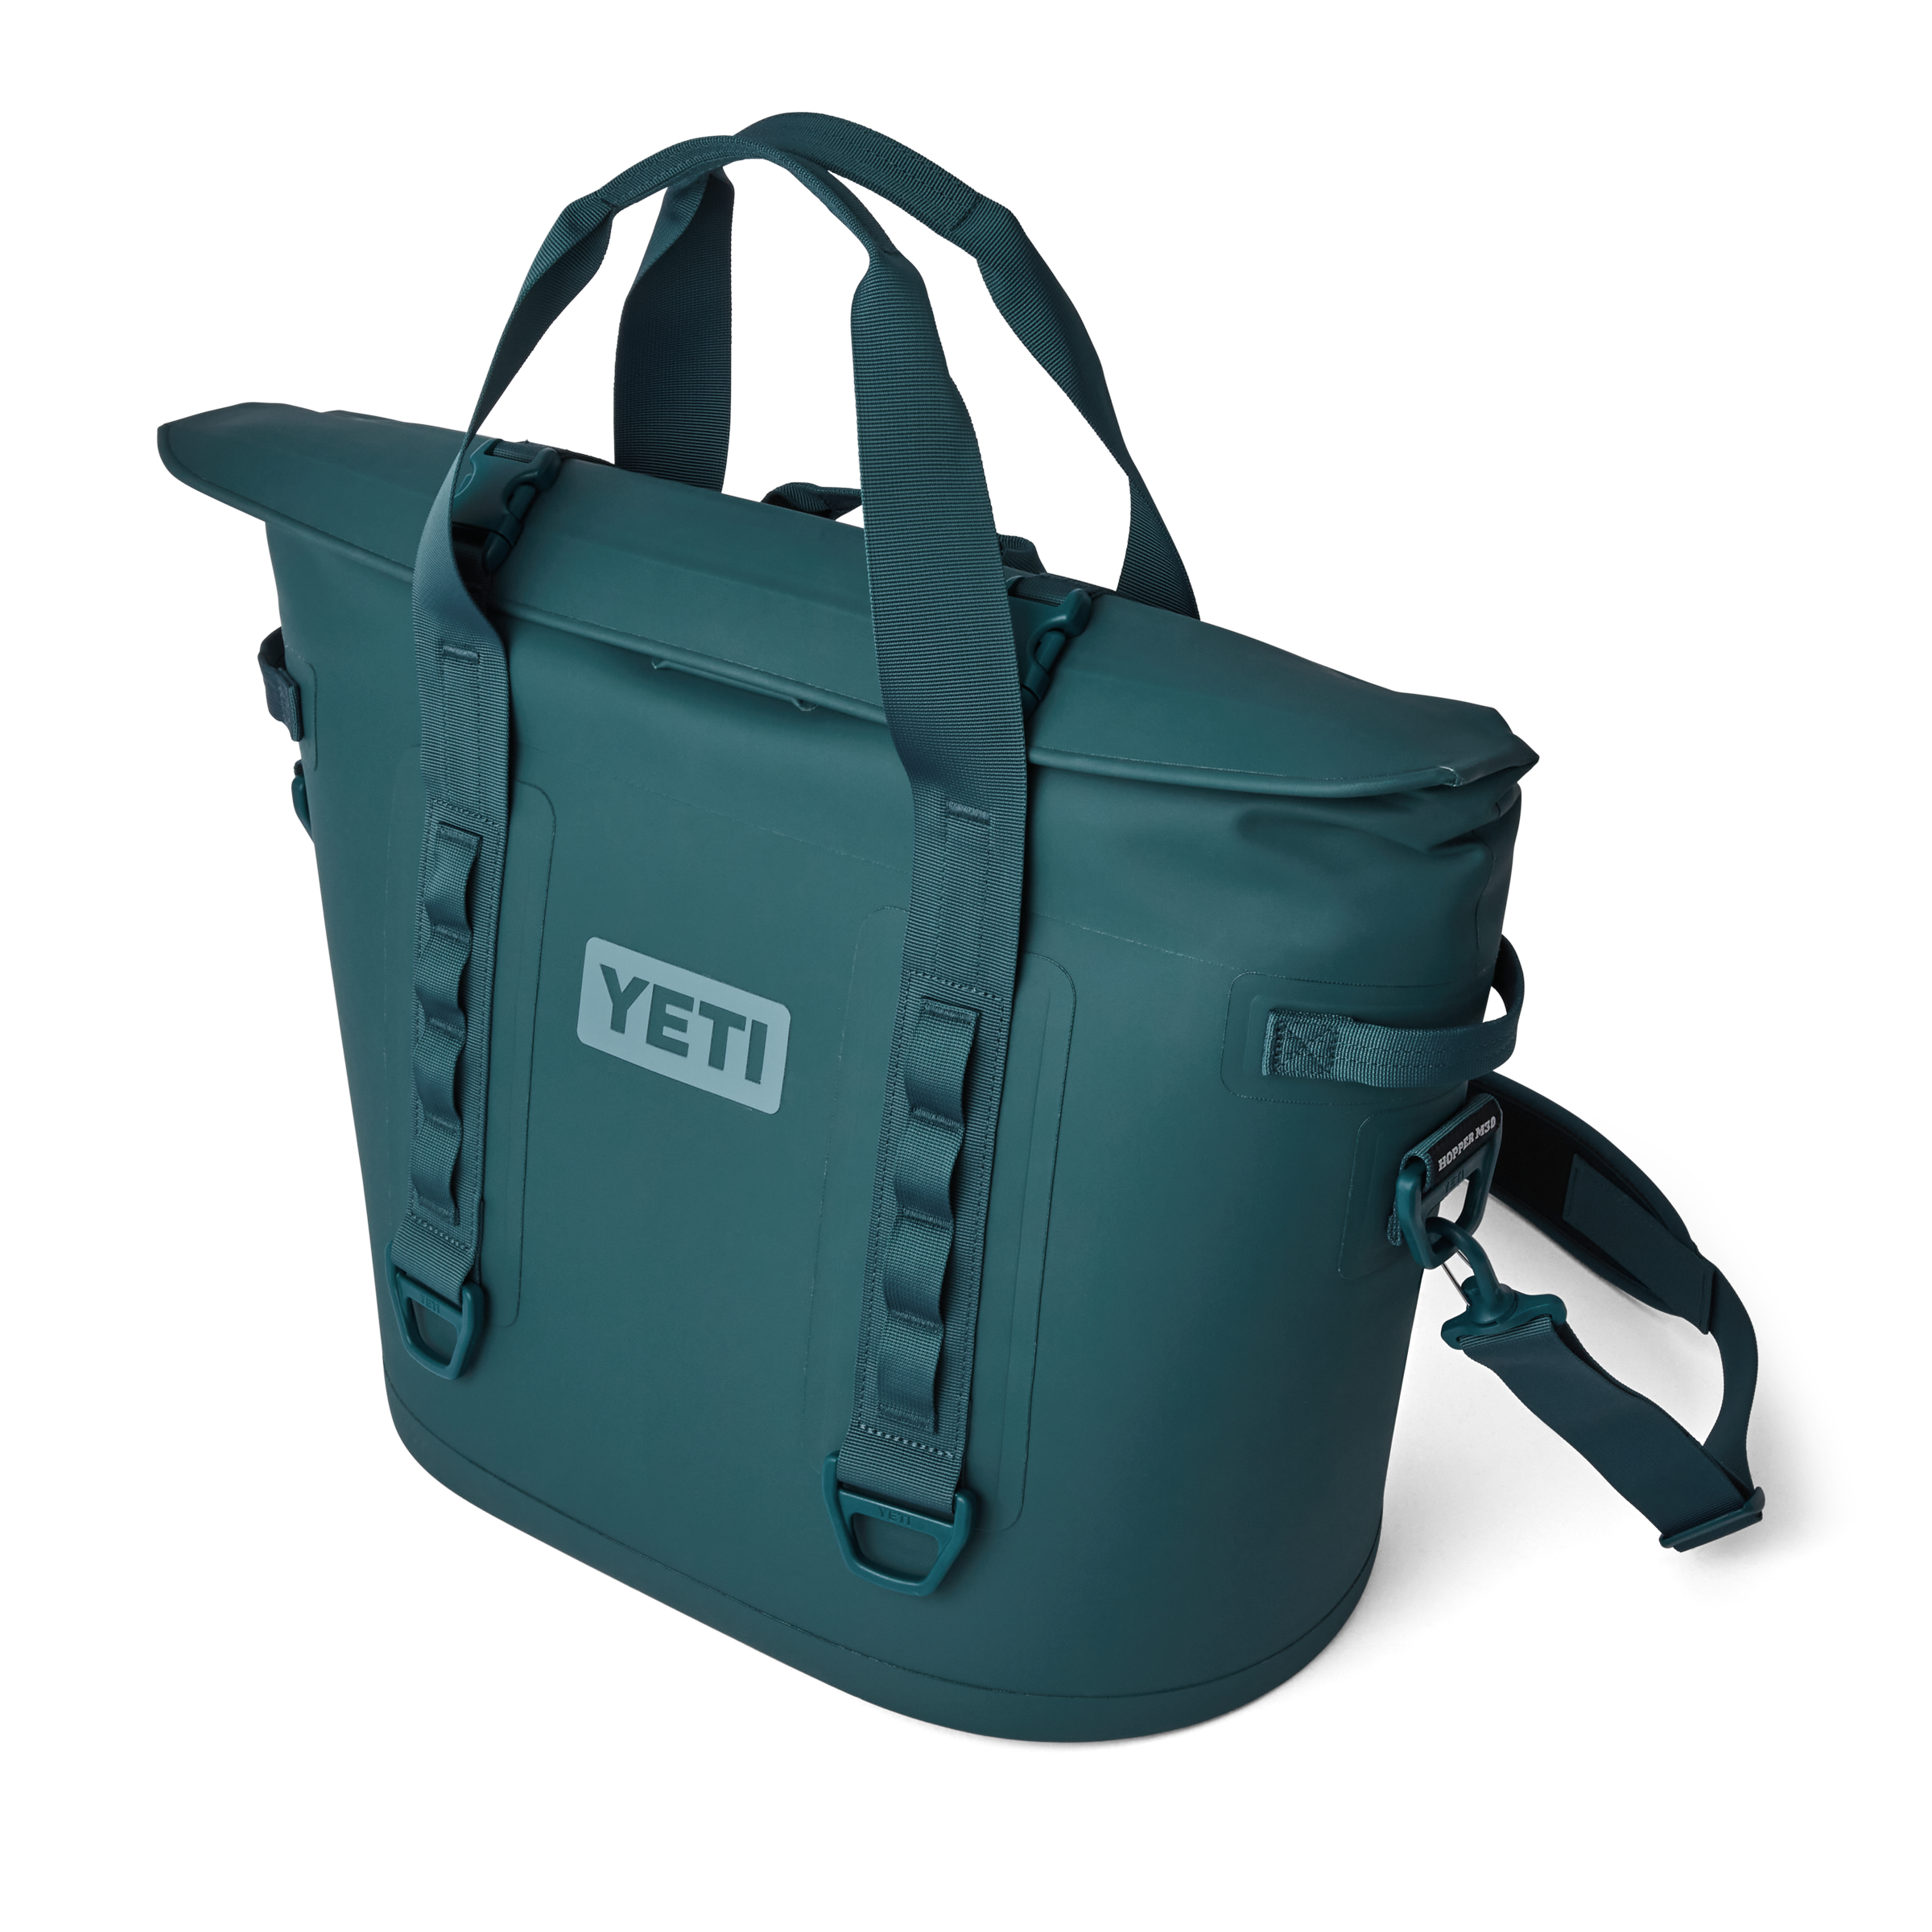 Yeti Hopper M30 2.5 Soft Cooler - AGAVE TEAL - Mansfield Hunting & Fishing - Products to prepare for Corona Virus